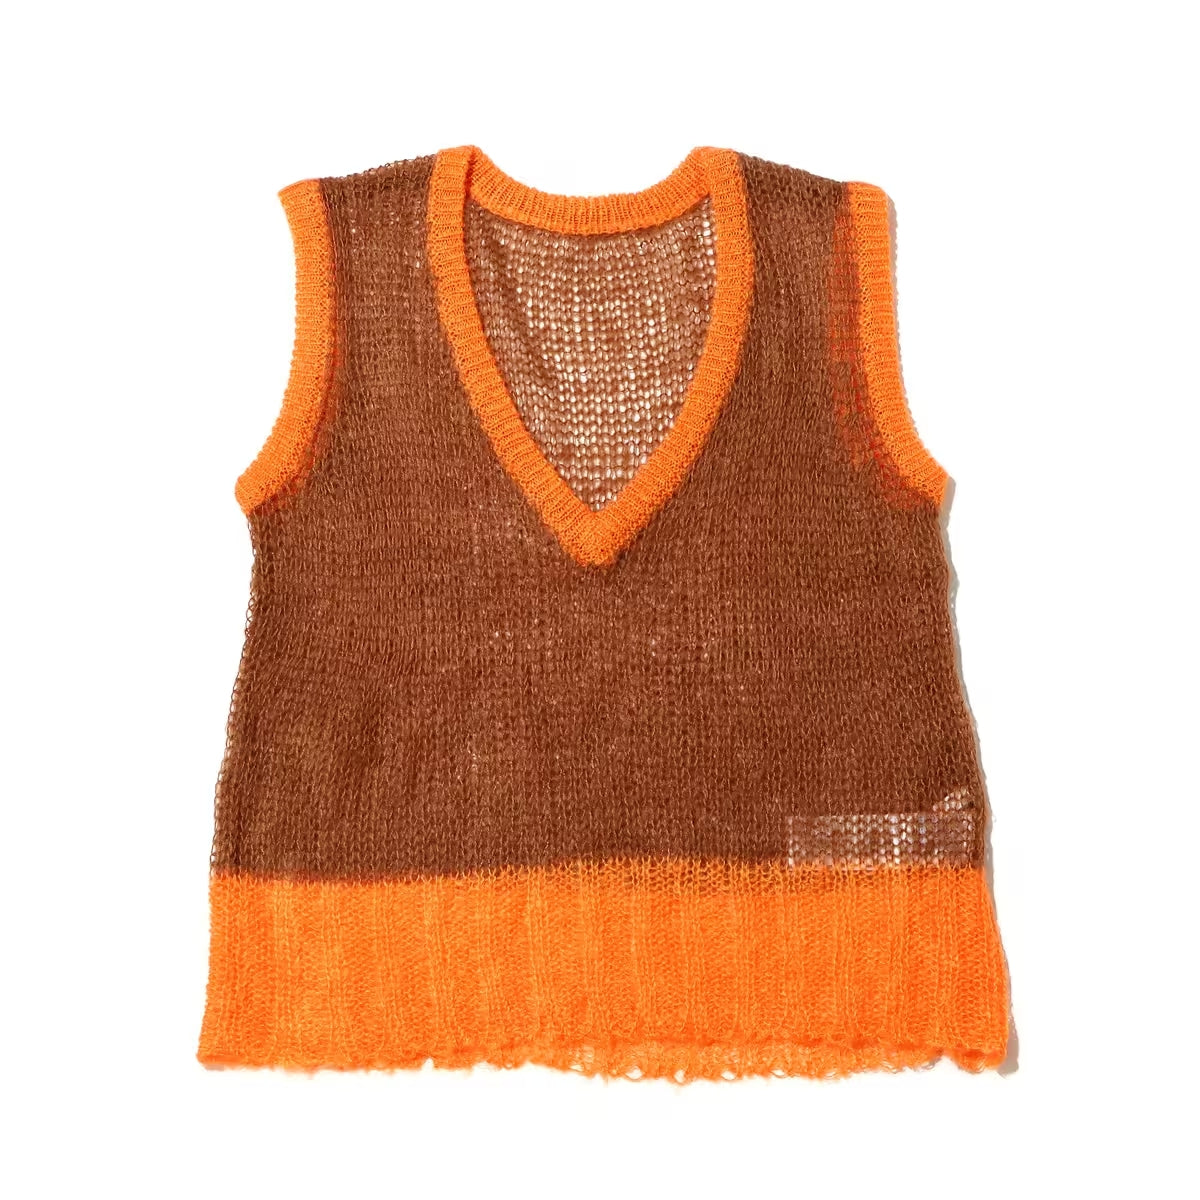 ATMOS PINK MOHAIR STYLE OPENWORK KNIT VEST